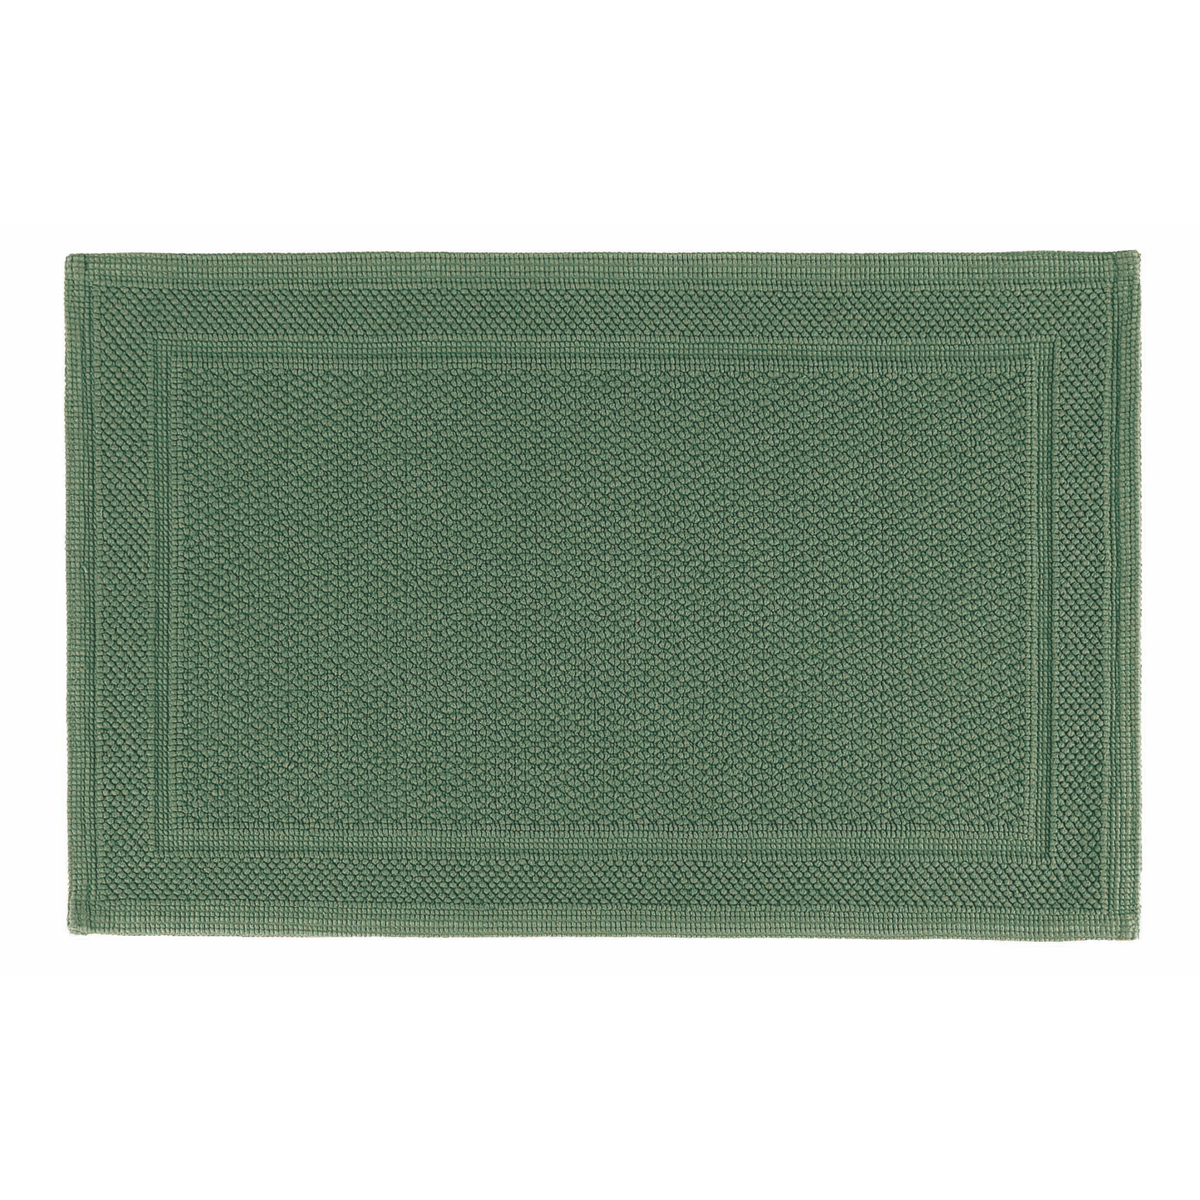 Top View of Graccioza Bee Waffle Woven Bath Mat in Jade Color